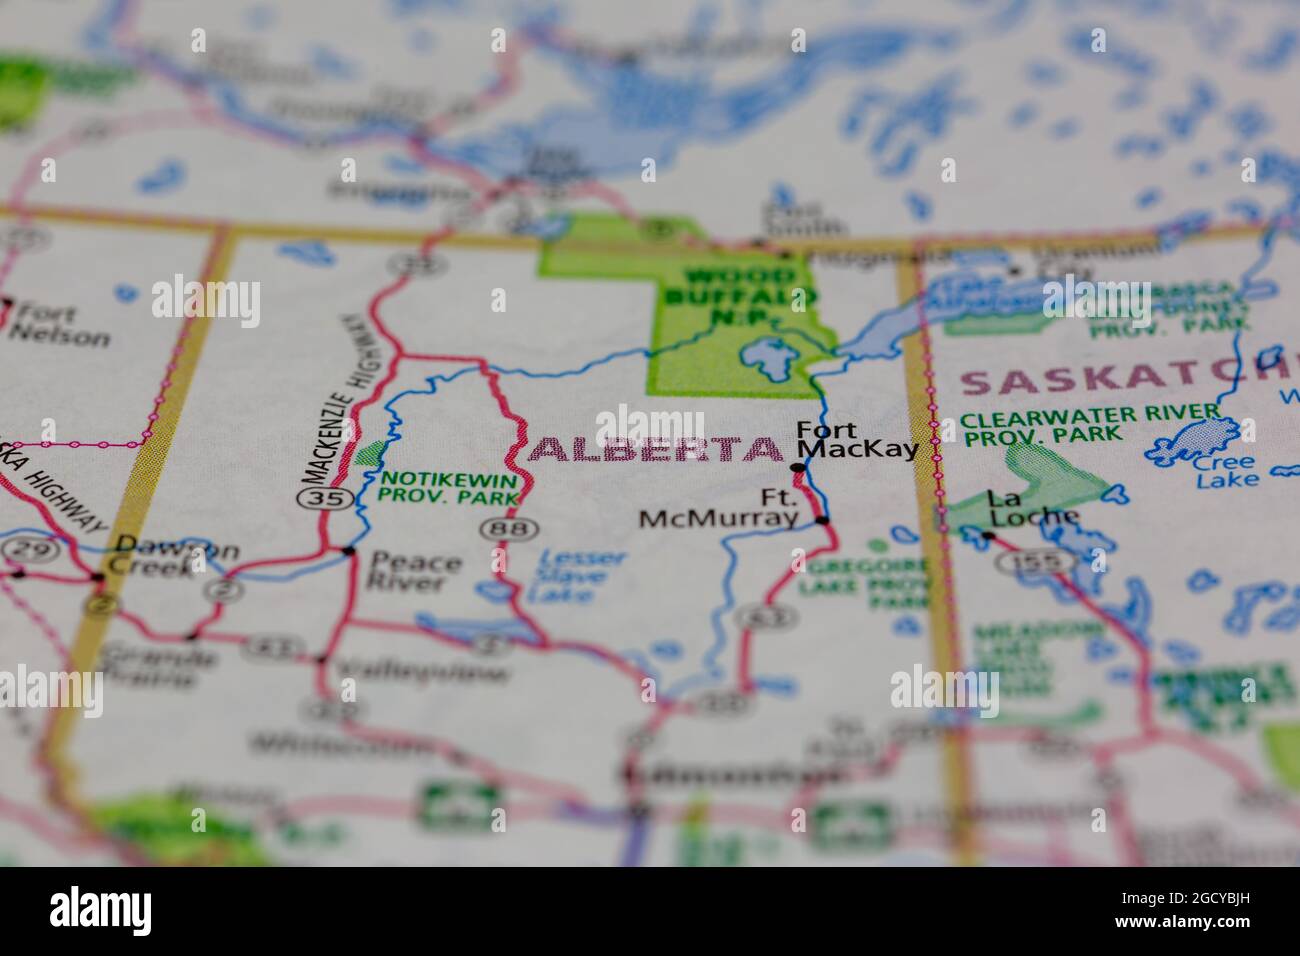 Alberta Canada shown on a road map or Geography map Stock Photo